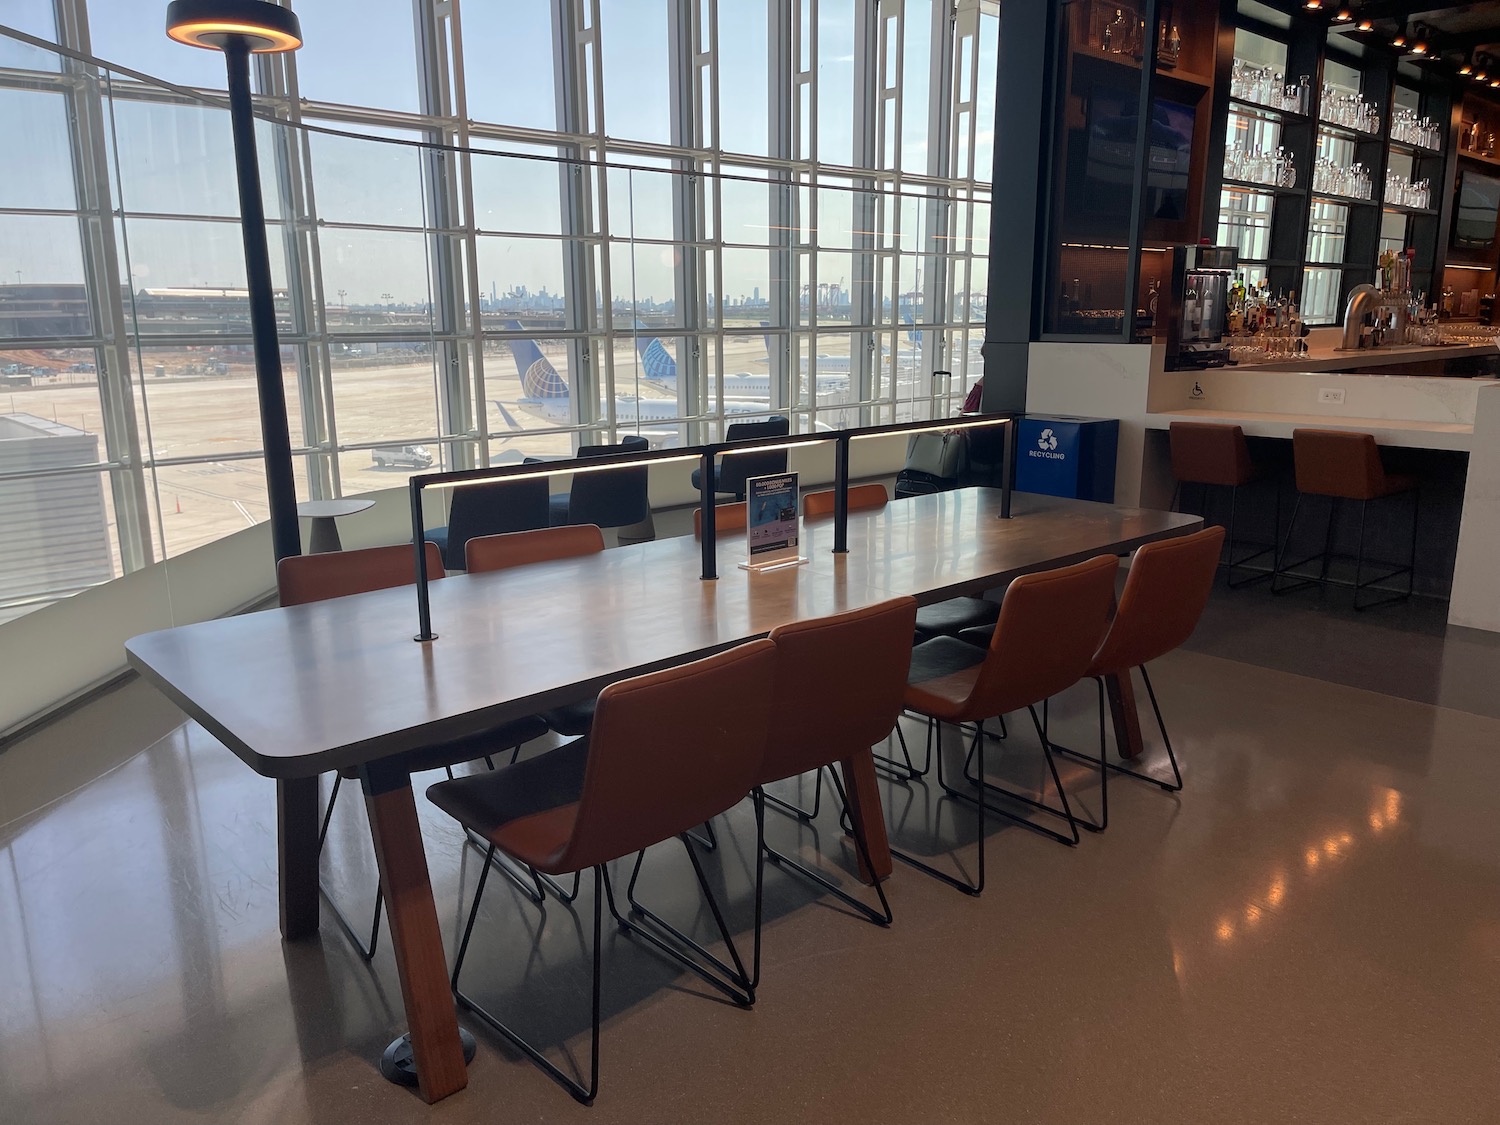 a table with chairs in a room with windows